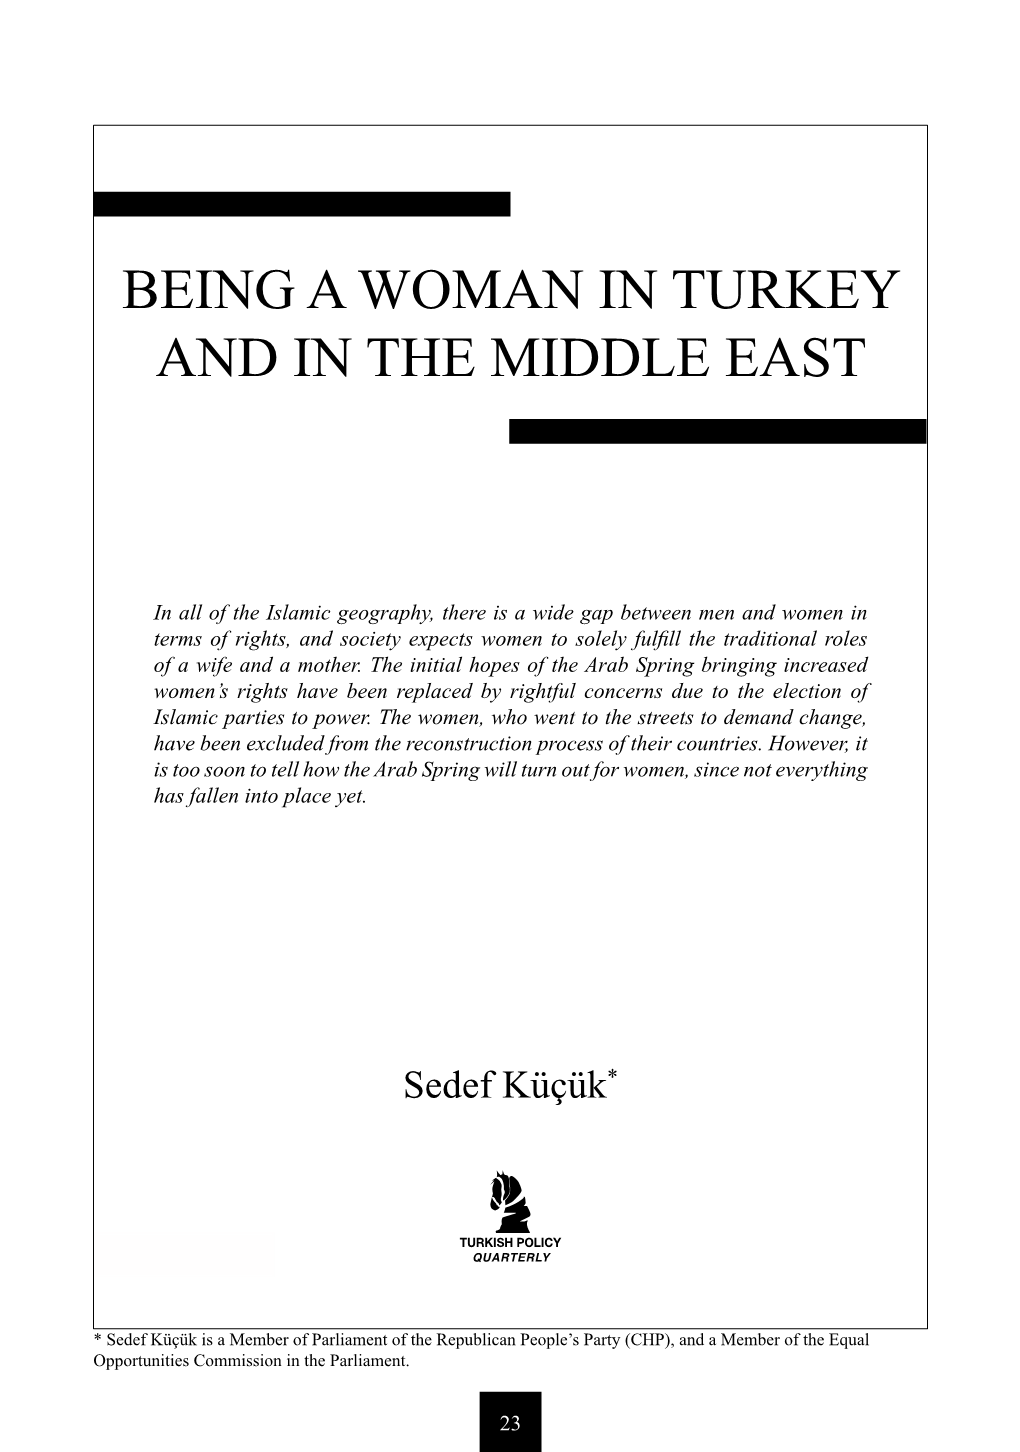 Being a Woman in Turkey and in the Middle East